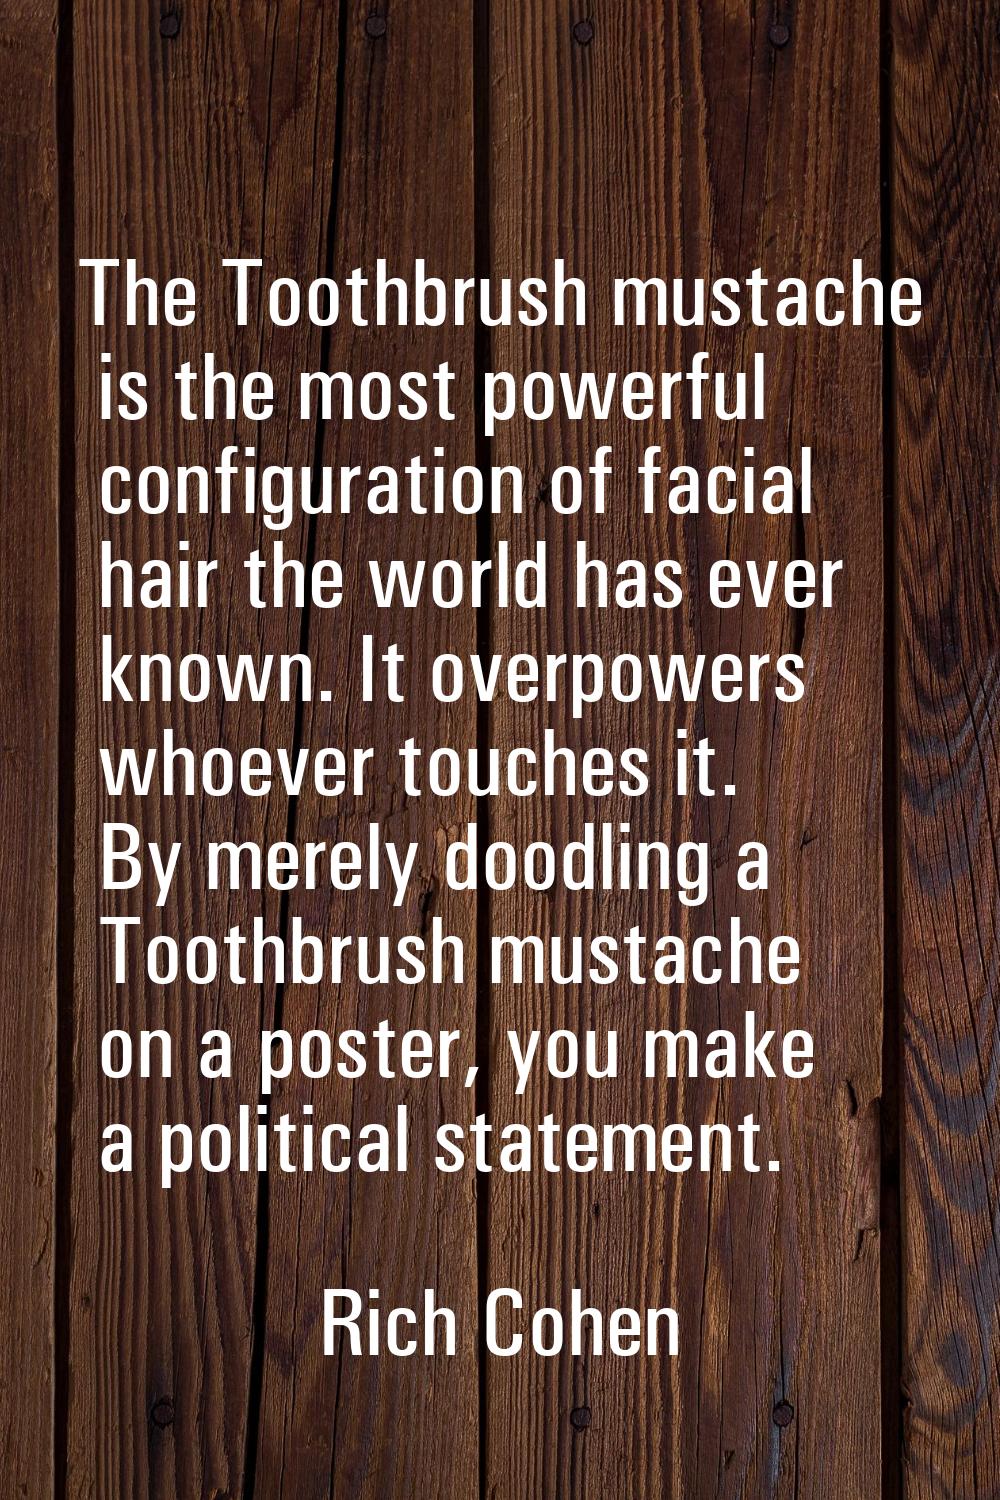 The Toothbrush mustache is the most powerful configuration of facial hair the world has ever known.